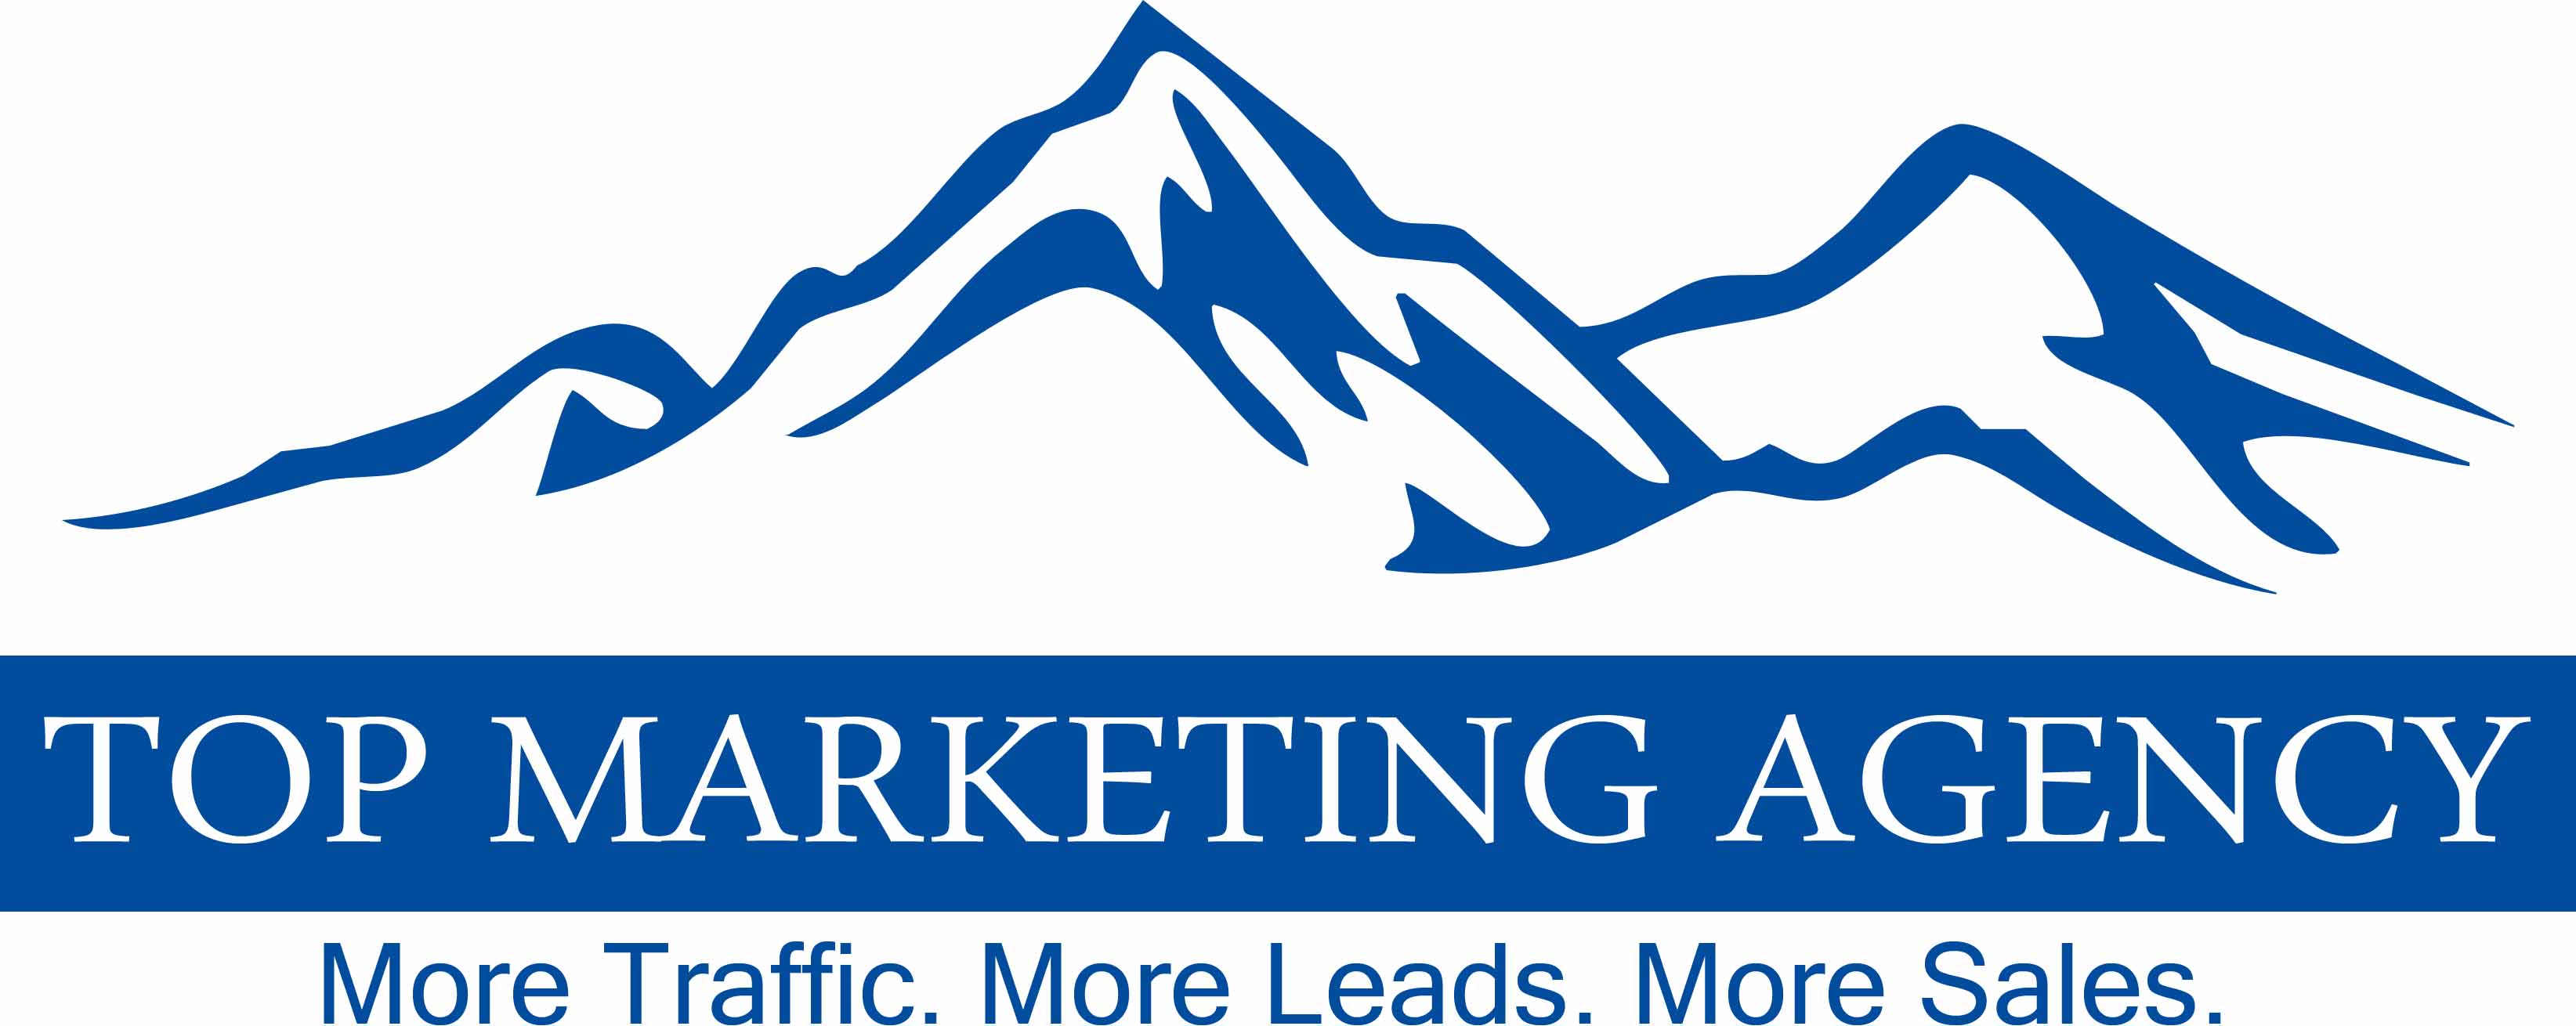 Hire a Marketing Agency To Help Your Business